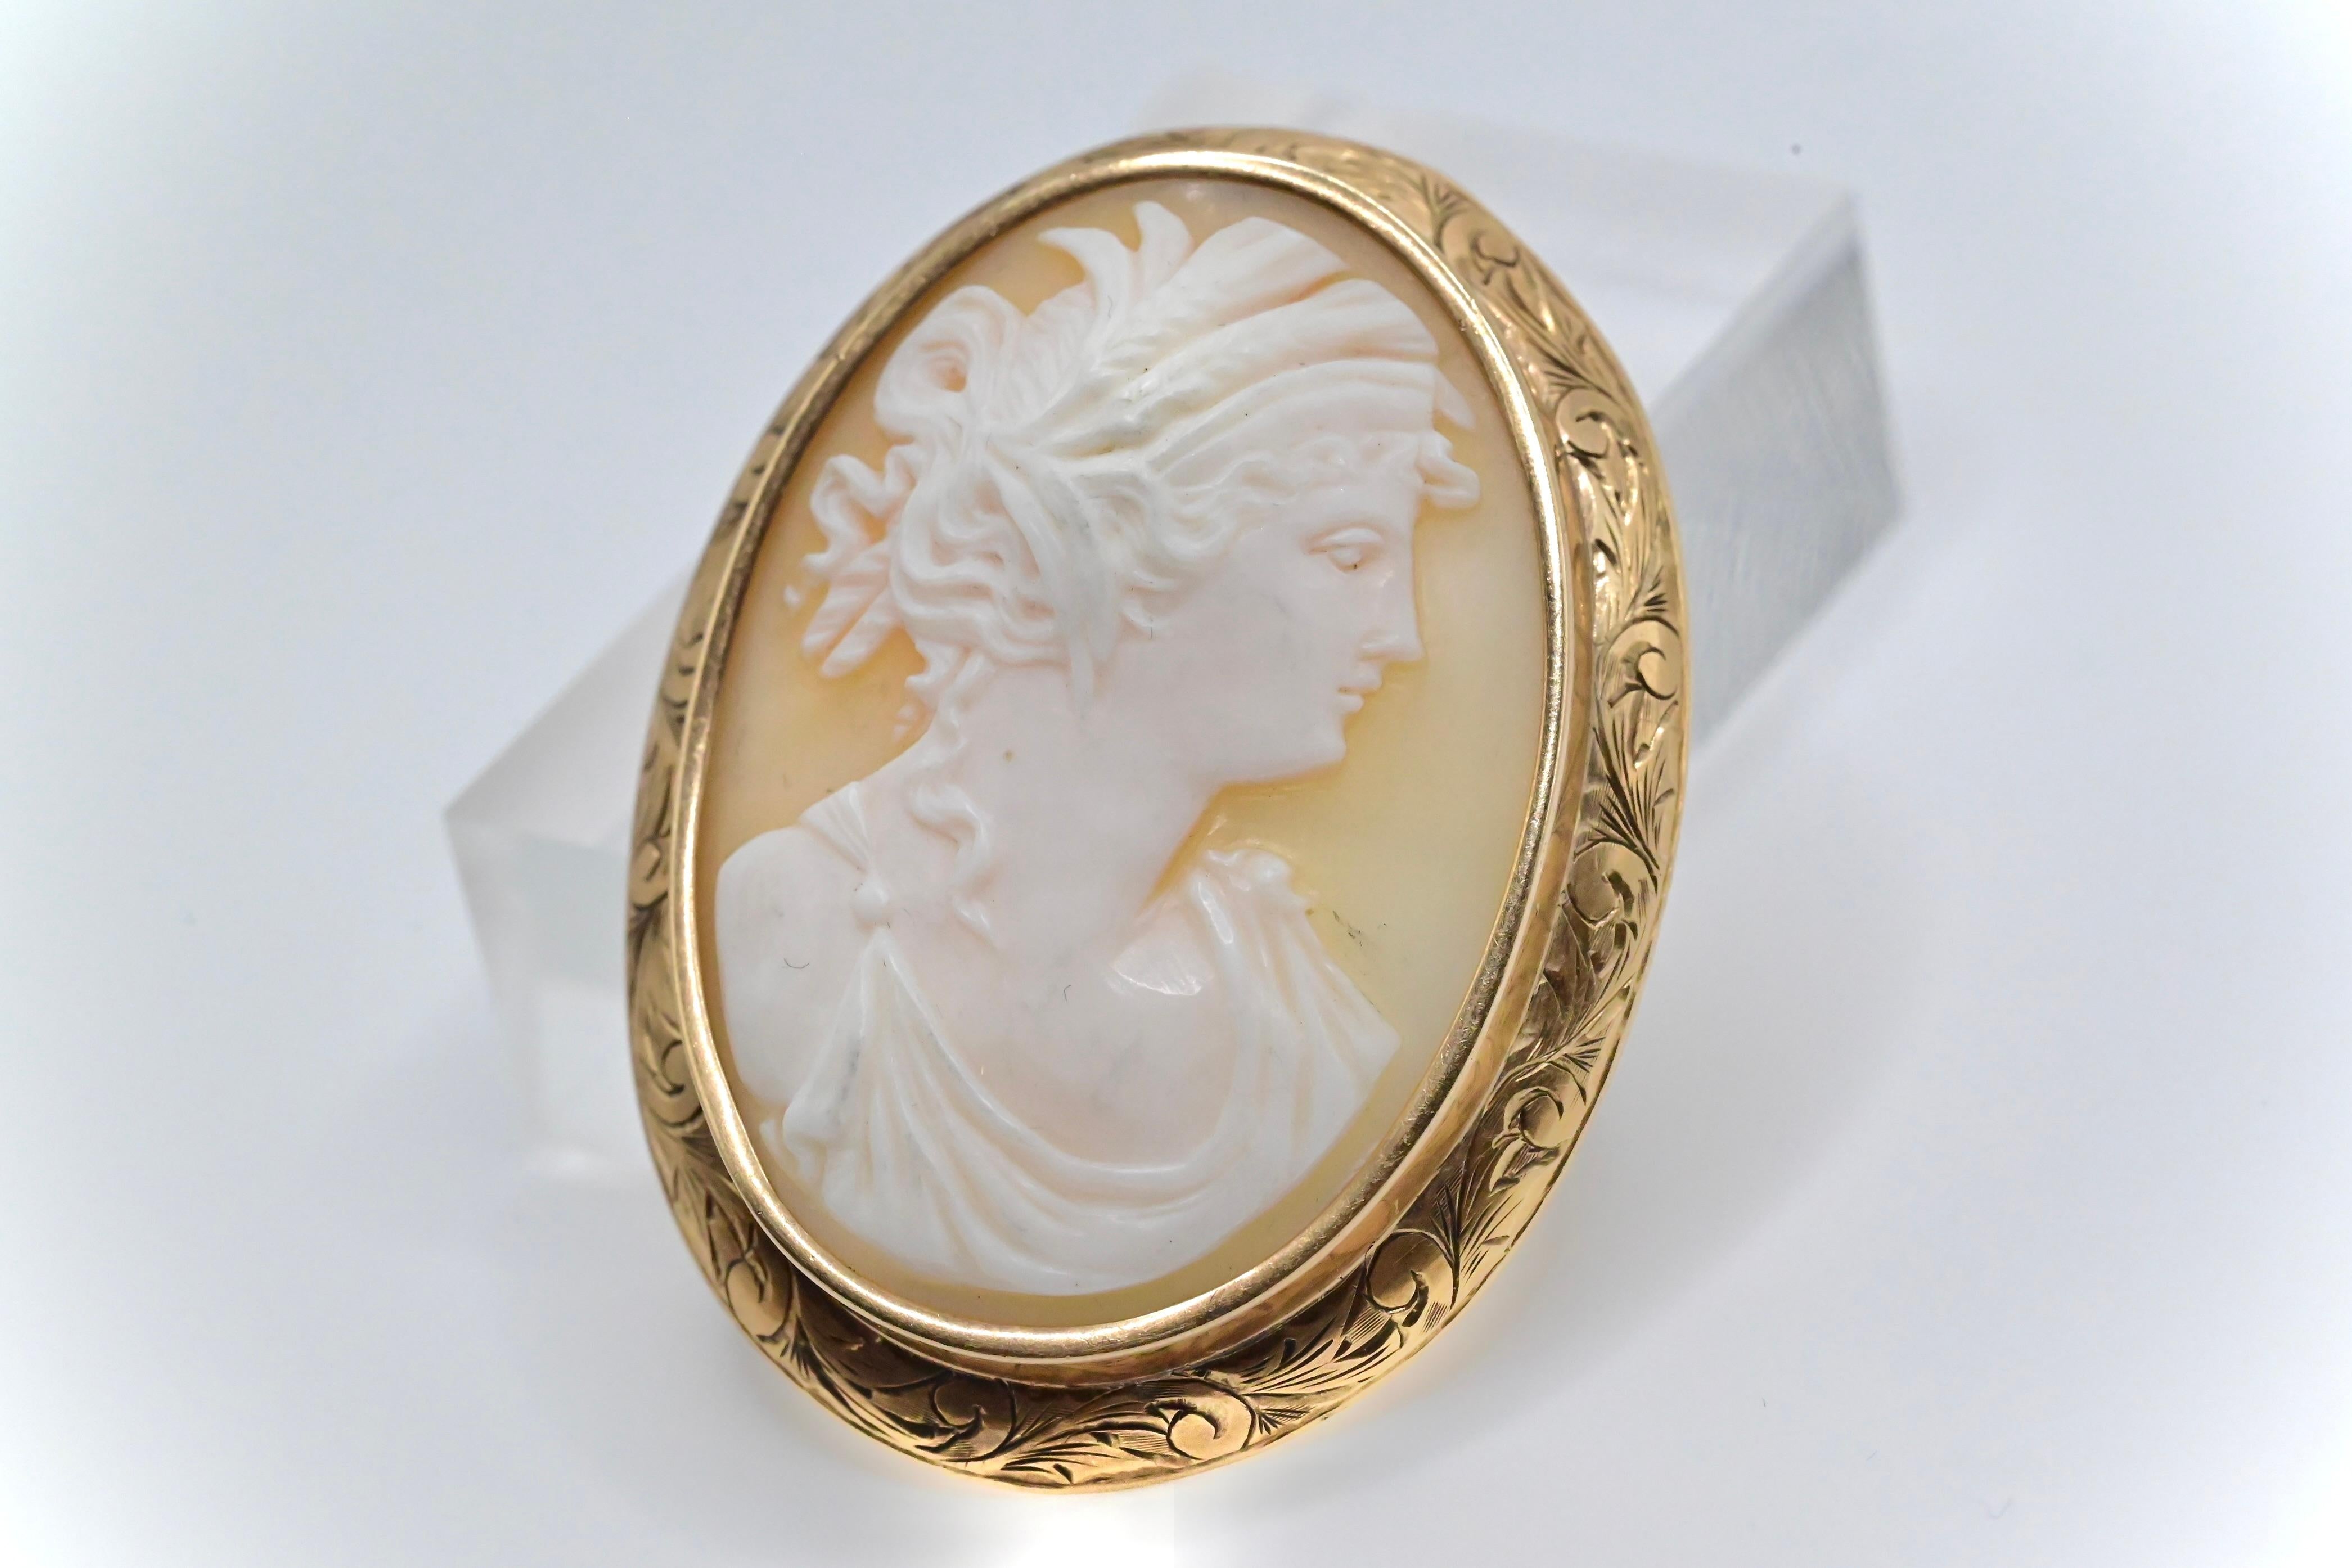 This is a beautiful carved shell cameo brooch encased in yellow gold, and has a gorgeous border. It weighs 12 grams, stands at 2 1/8 inches, and has a diameter of 1 3/8 of an inch. It’s in good condition with signs of wear that are consistent with